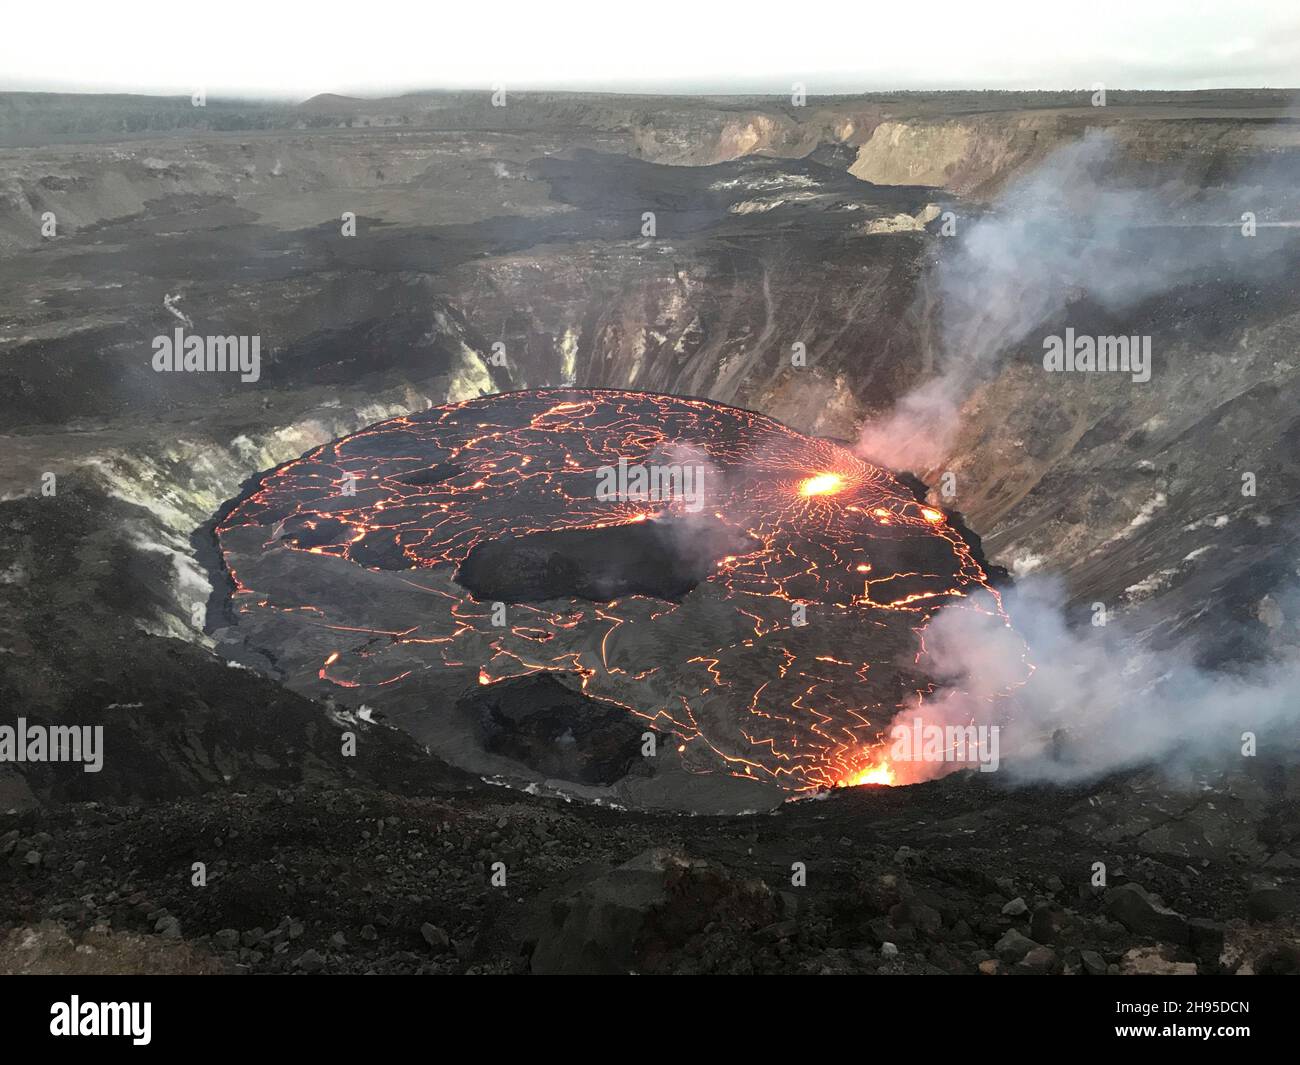 Kapoho, United States of America. 02 October, 2021. Lava continues to erupt from multiple vents on the base and west wall of Halemaumau, at Kilauea summit inside Hawaii Volcanoes National Park, October 2, 2021 in Kapok, Hawaii. Lava fountaining at multiple fissure locations on the base and west wall of the crater continued, and a lava lake is growing within the volcanic crater.  Credit: Liliana DeSmither/USGS/Alamy Live News Stock Photo